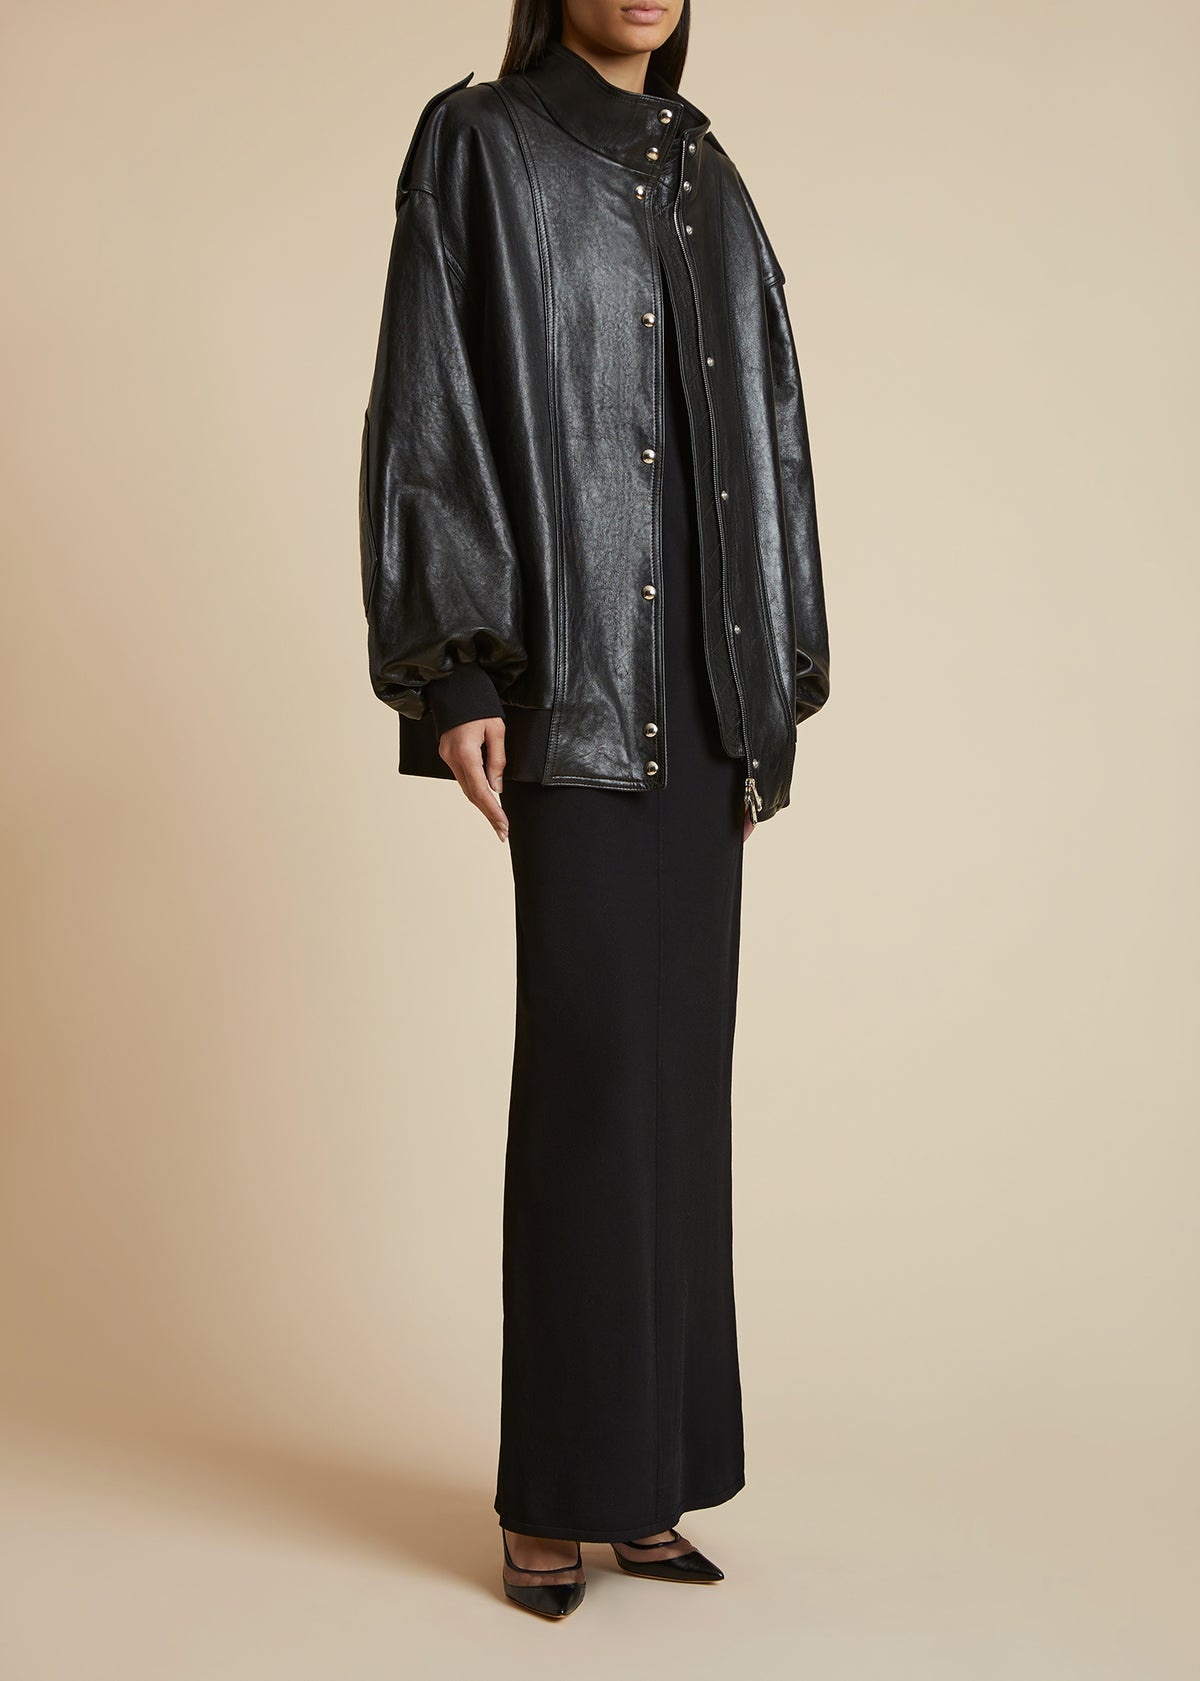 The Farris Jacket in Black Leather - 1